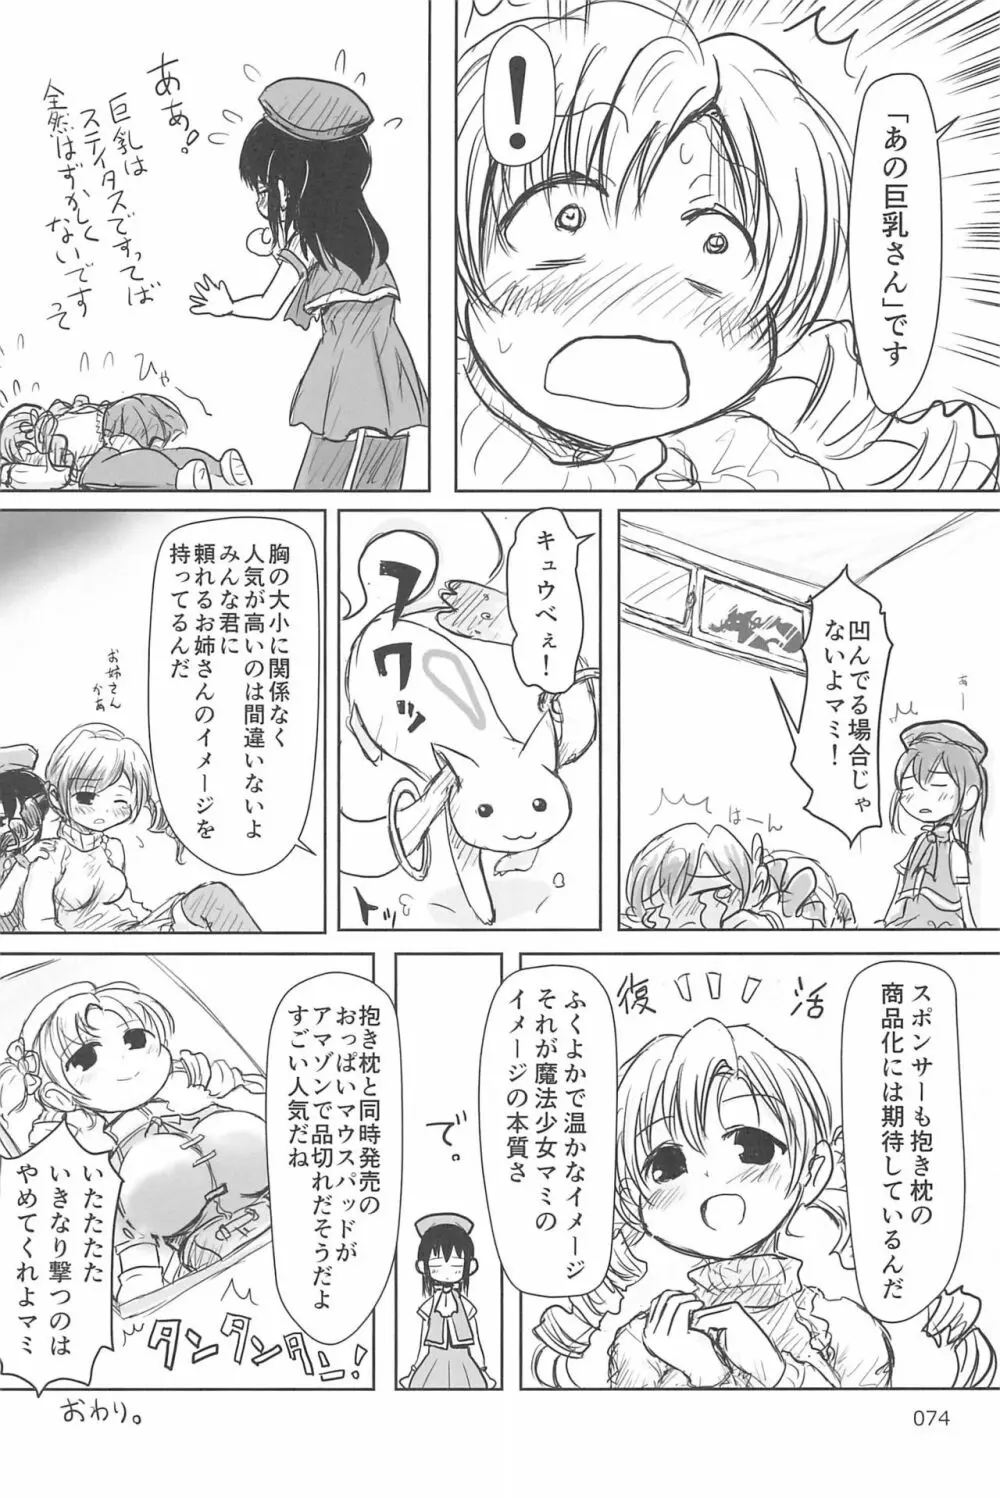 ND-special Volume 6 74ページ